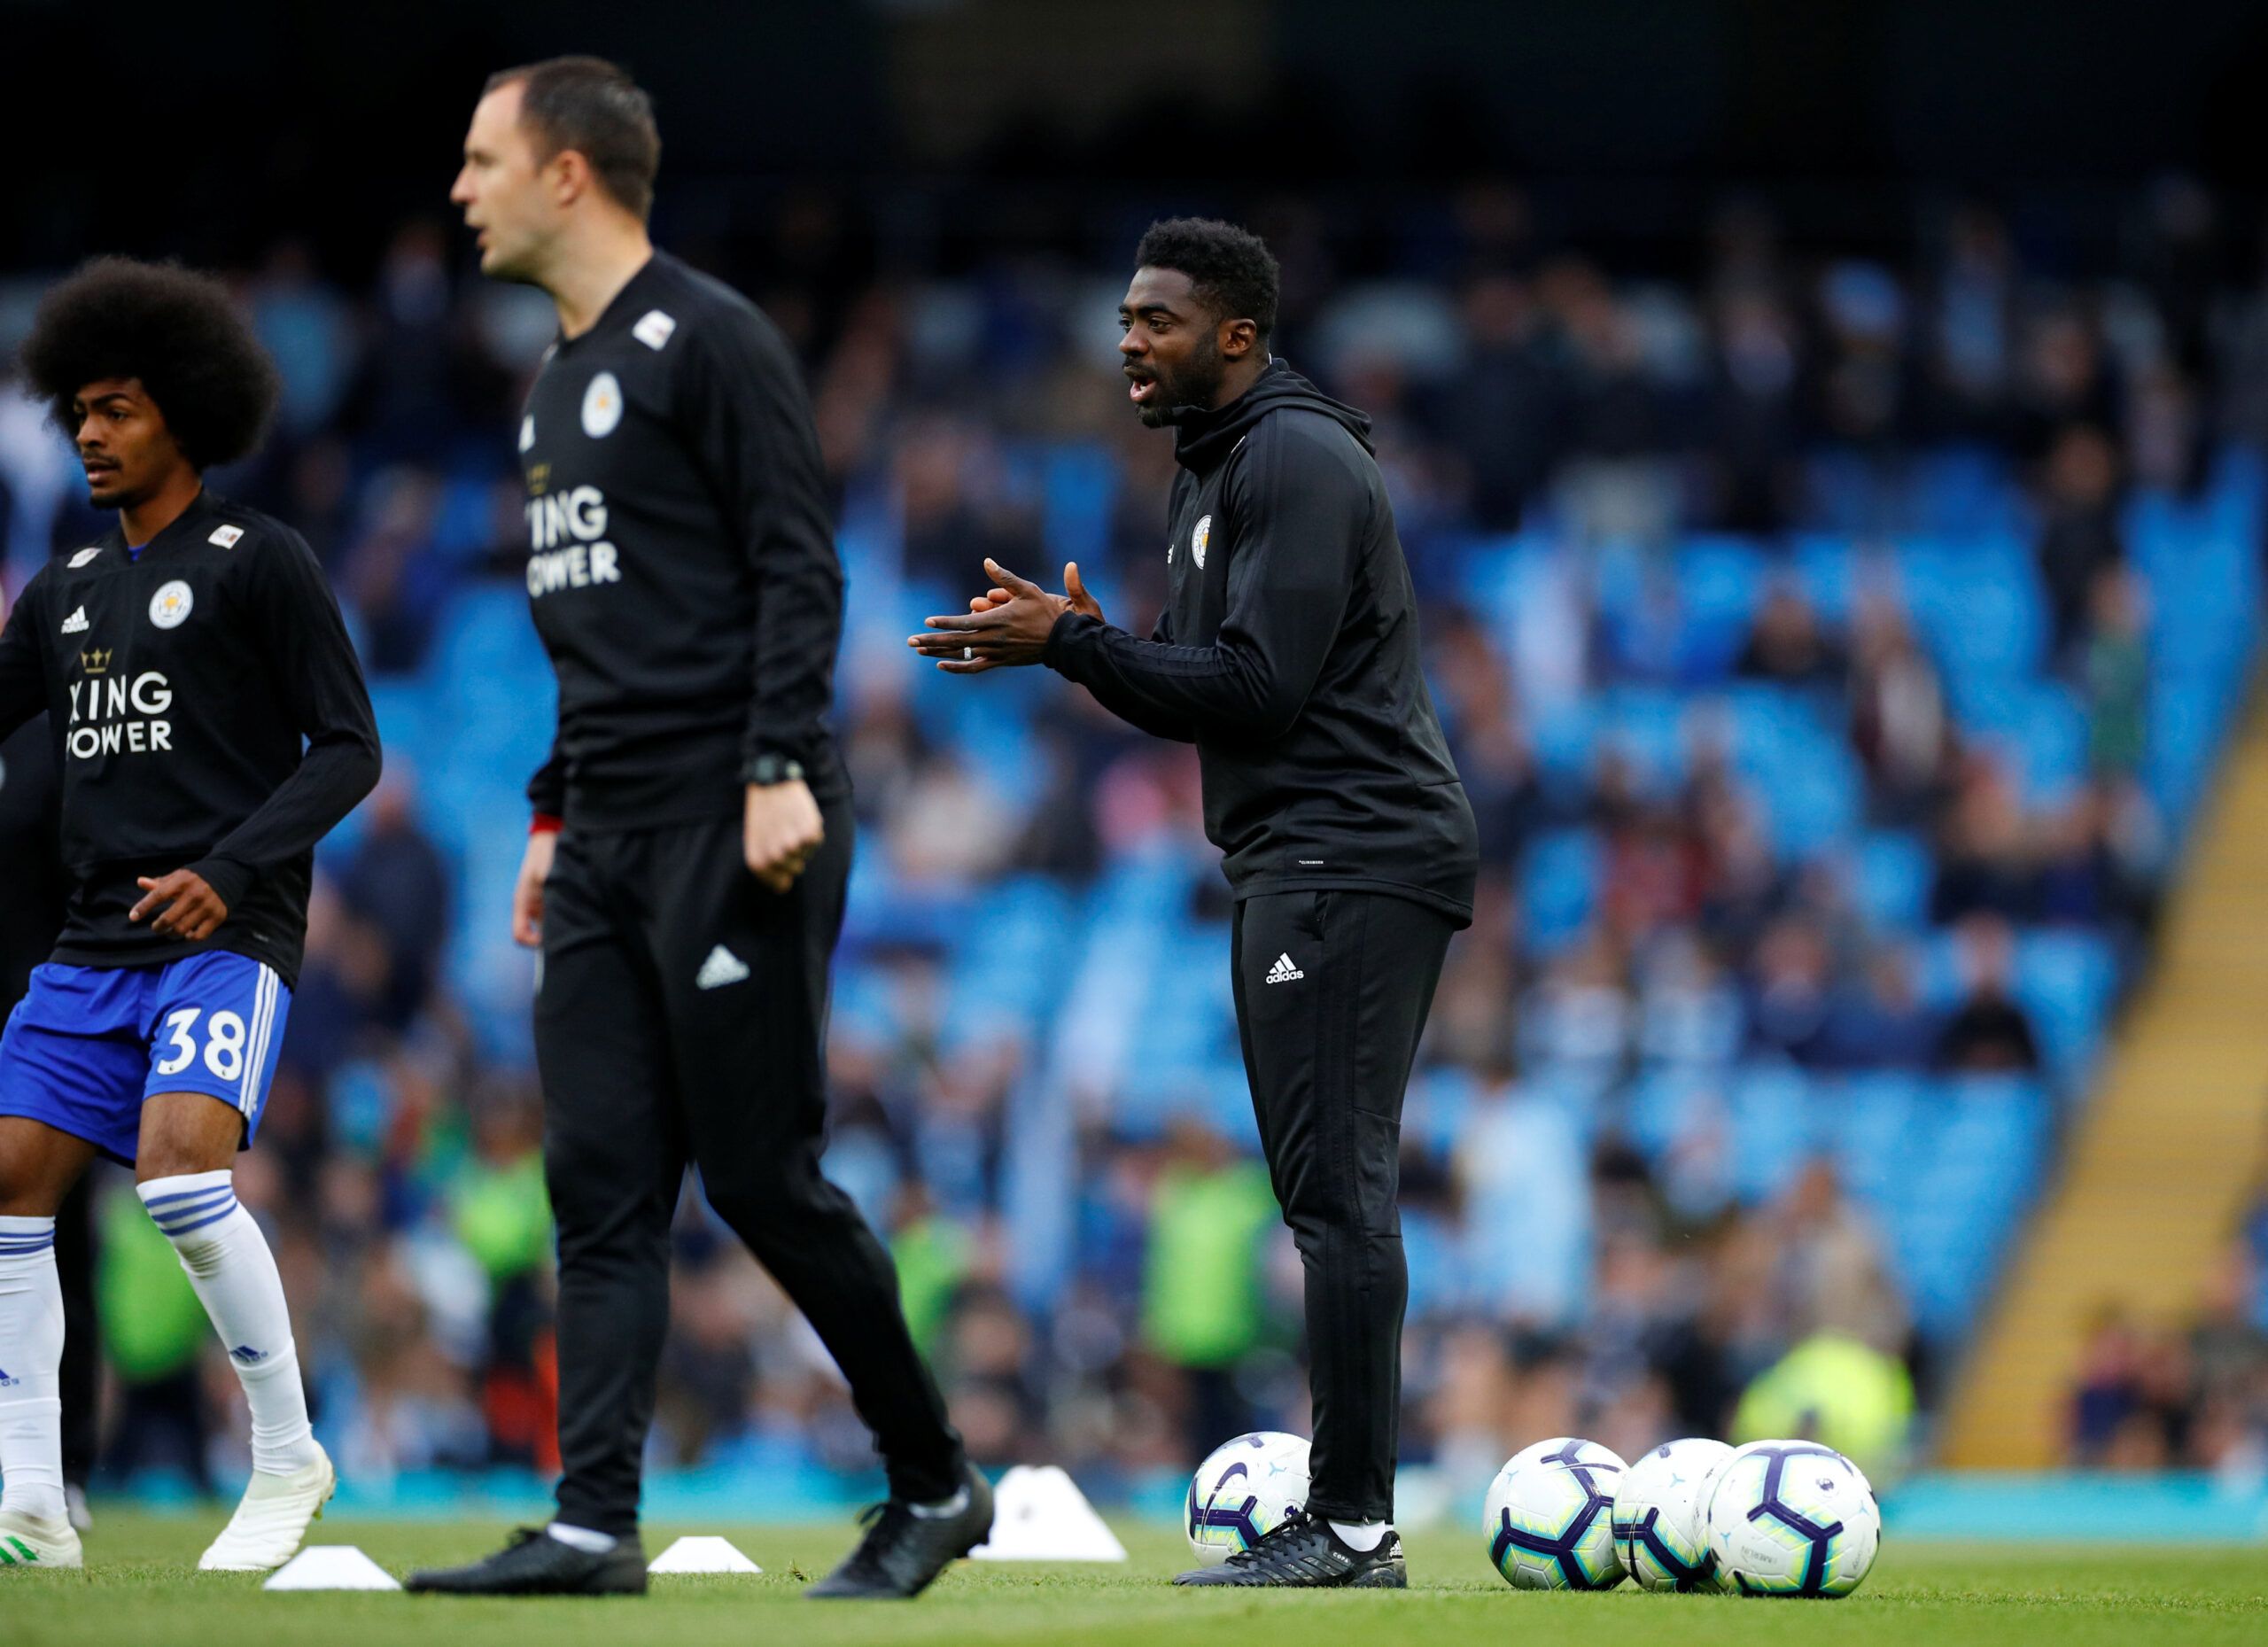 Soccer Football - Premier League - Manchester City v Leicester City - Etihad Stadium, Manchester, Britain - May 6, 2019  Leicester City first team coach Kolo Toure during the warm up before the match   REUTERS/Phil Noble  EDITORIAL USE ONLY. No use with unauthorized audio, video, data, fixture lists, club/league logos or 